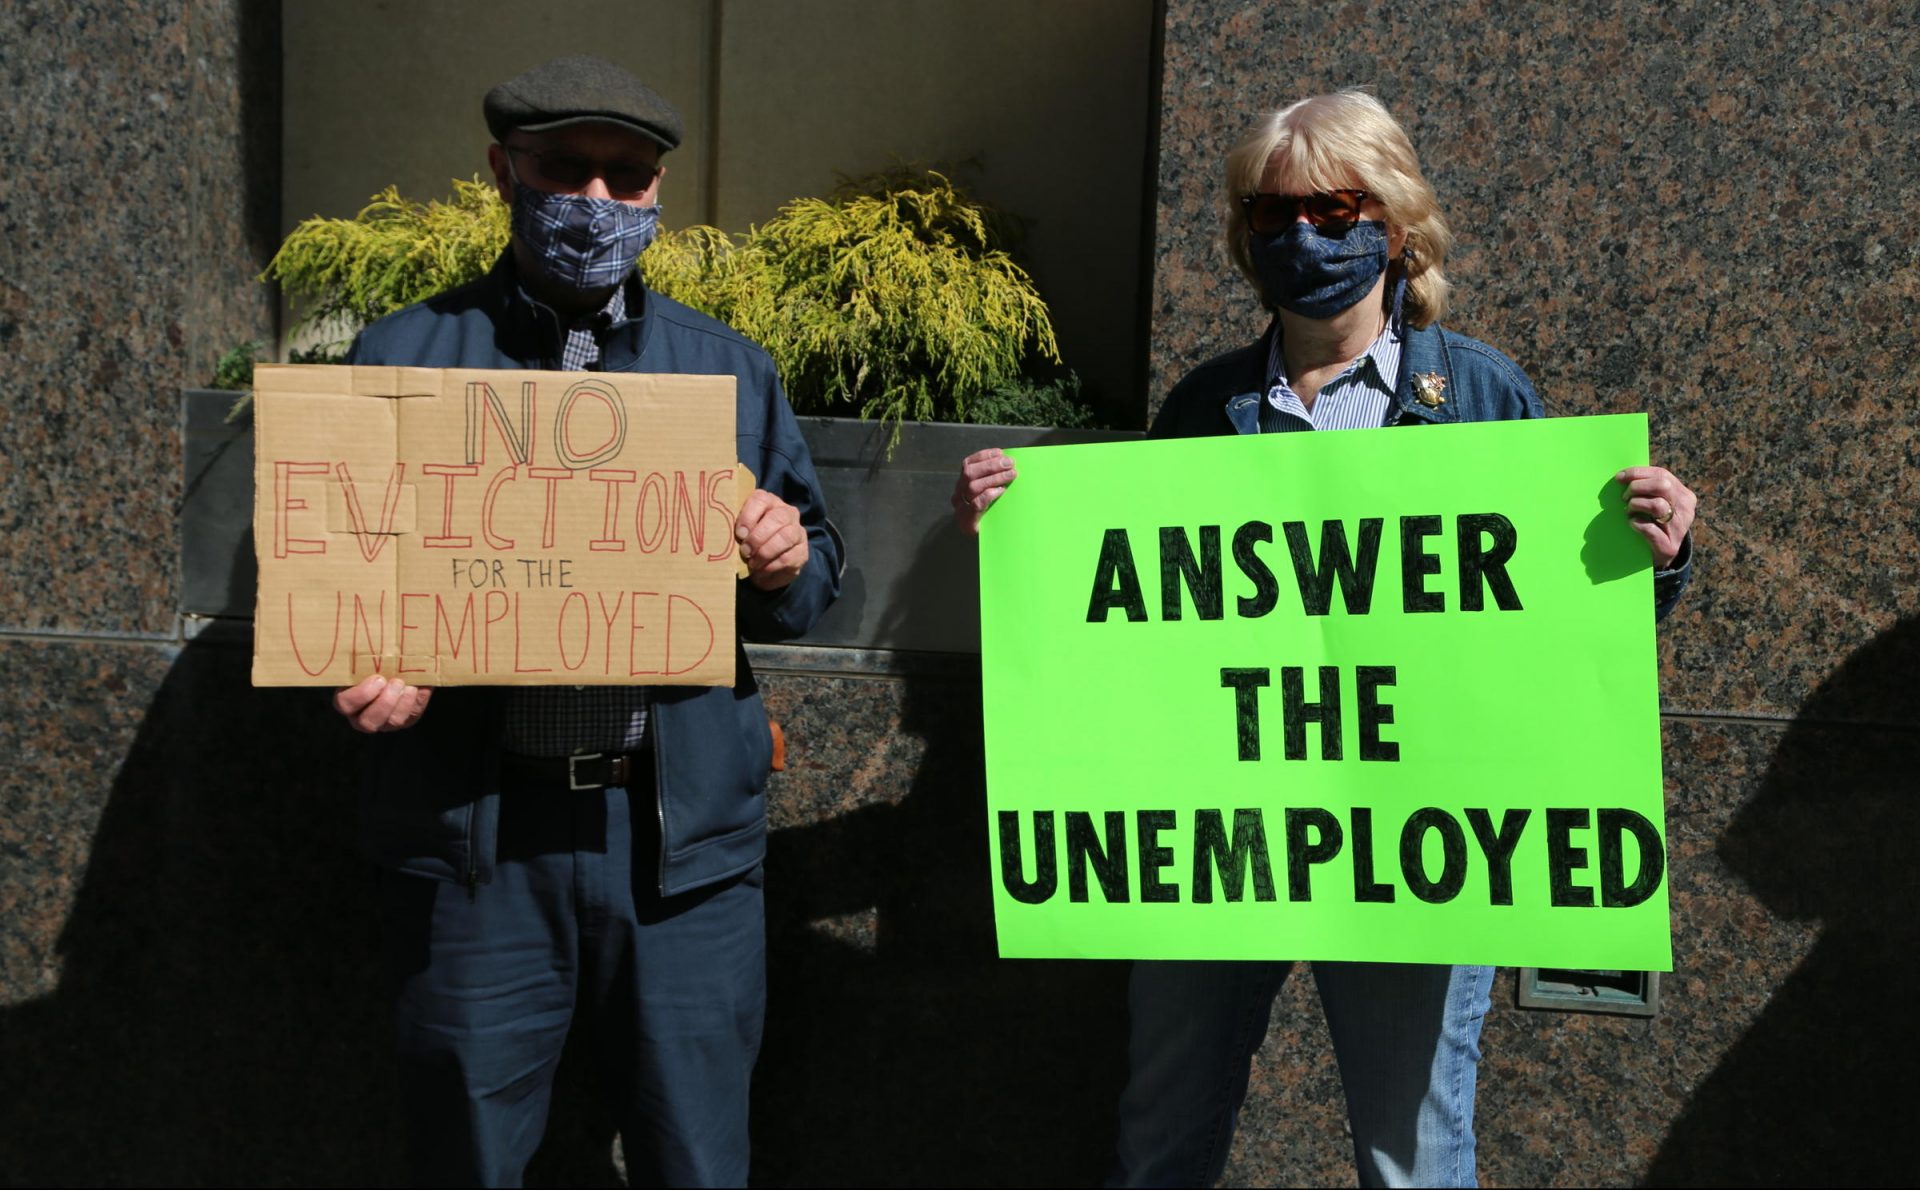 Two people hold signs at a rally in support of unemployed people in downtown Pittsburgh on Wednesday, March 10, 2021.